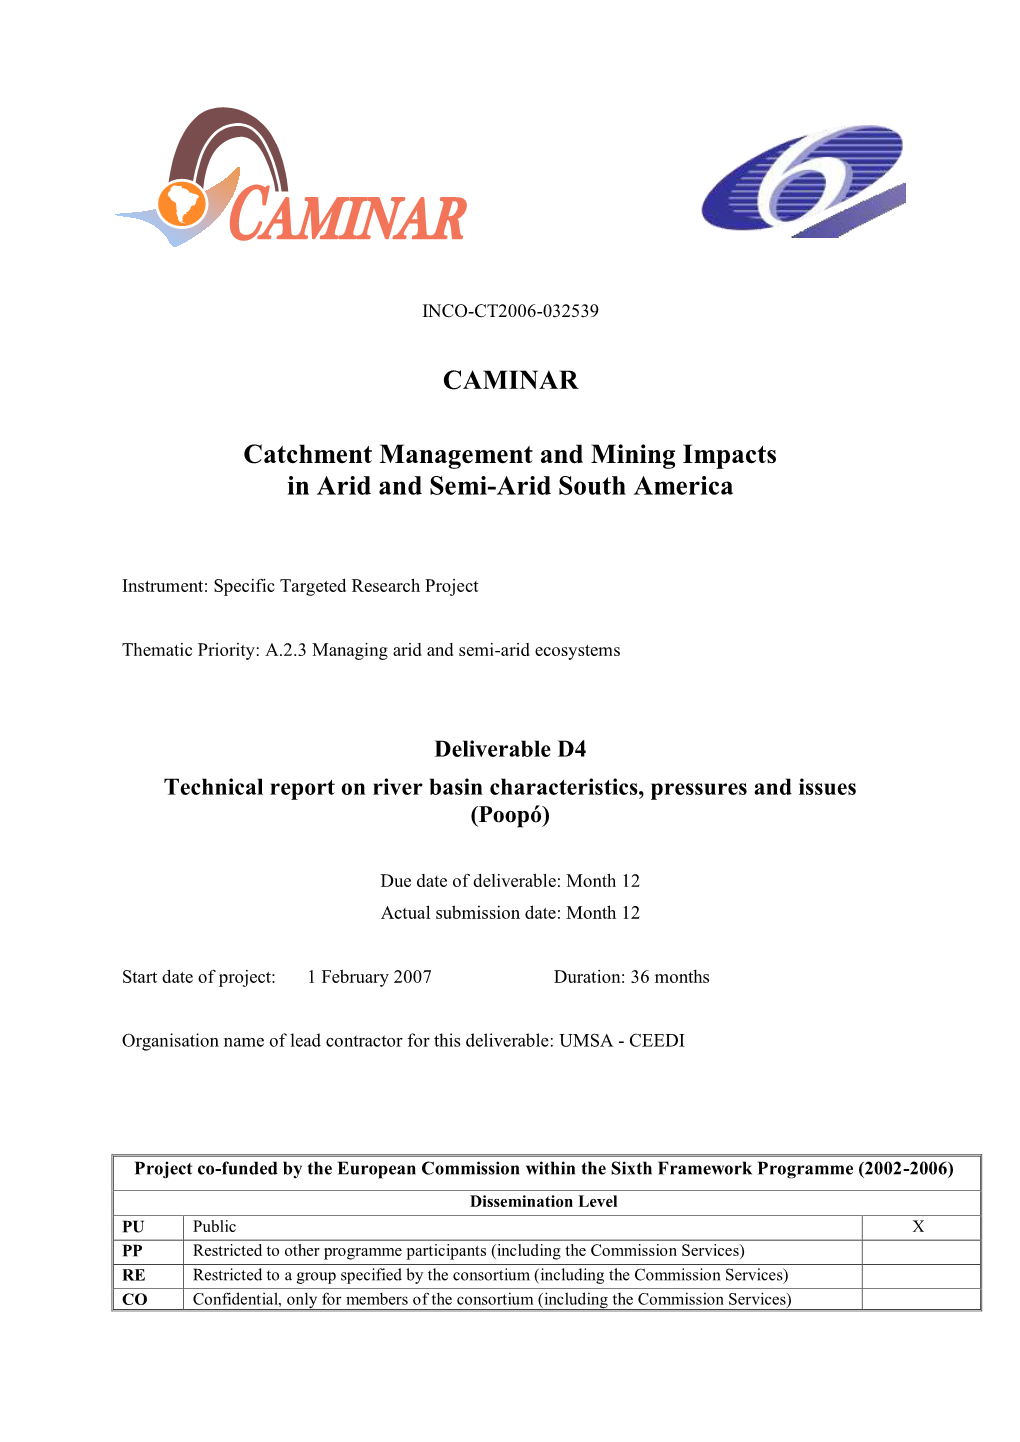 CAMINAR Catchment Management and Mining Impacts in Arid And